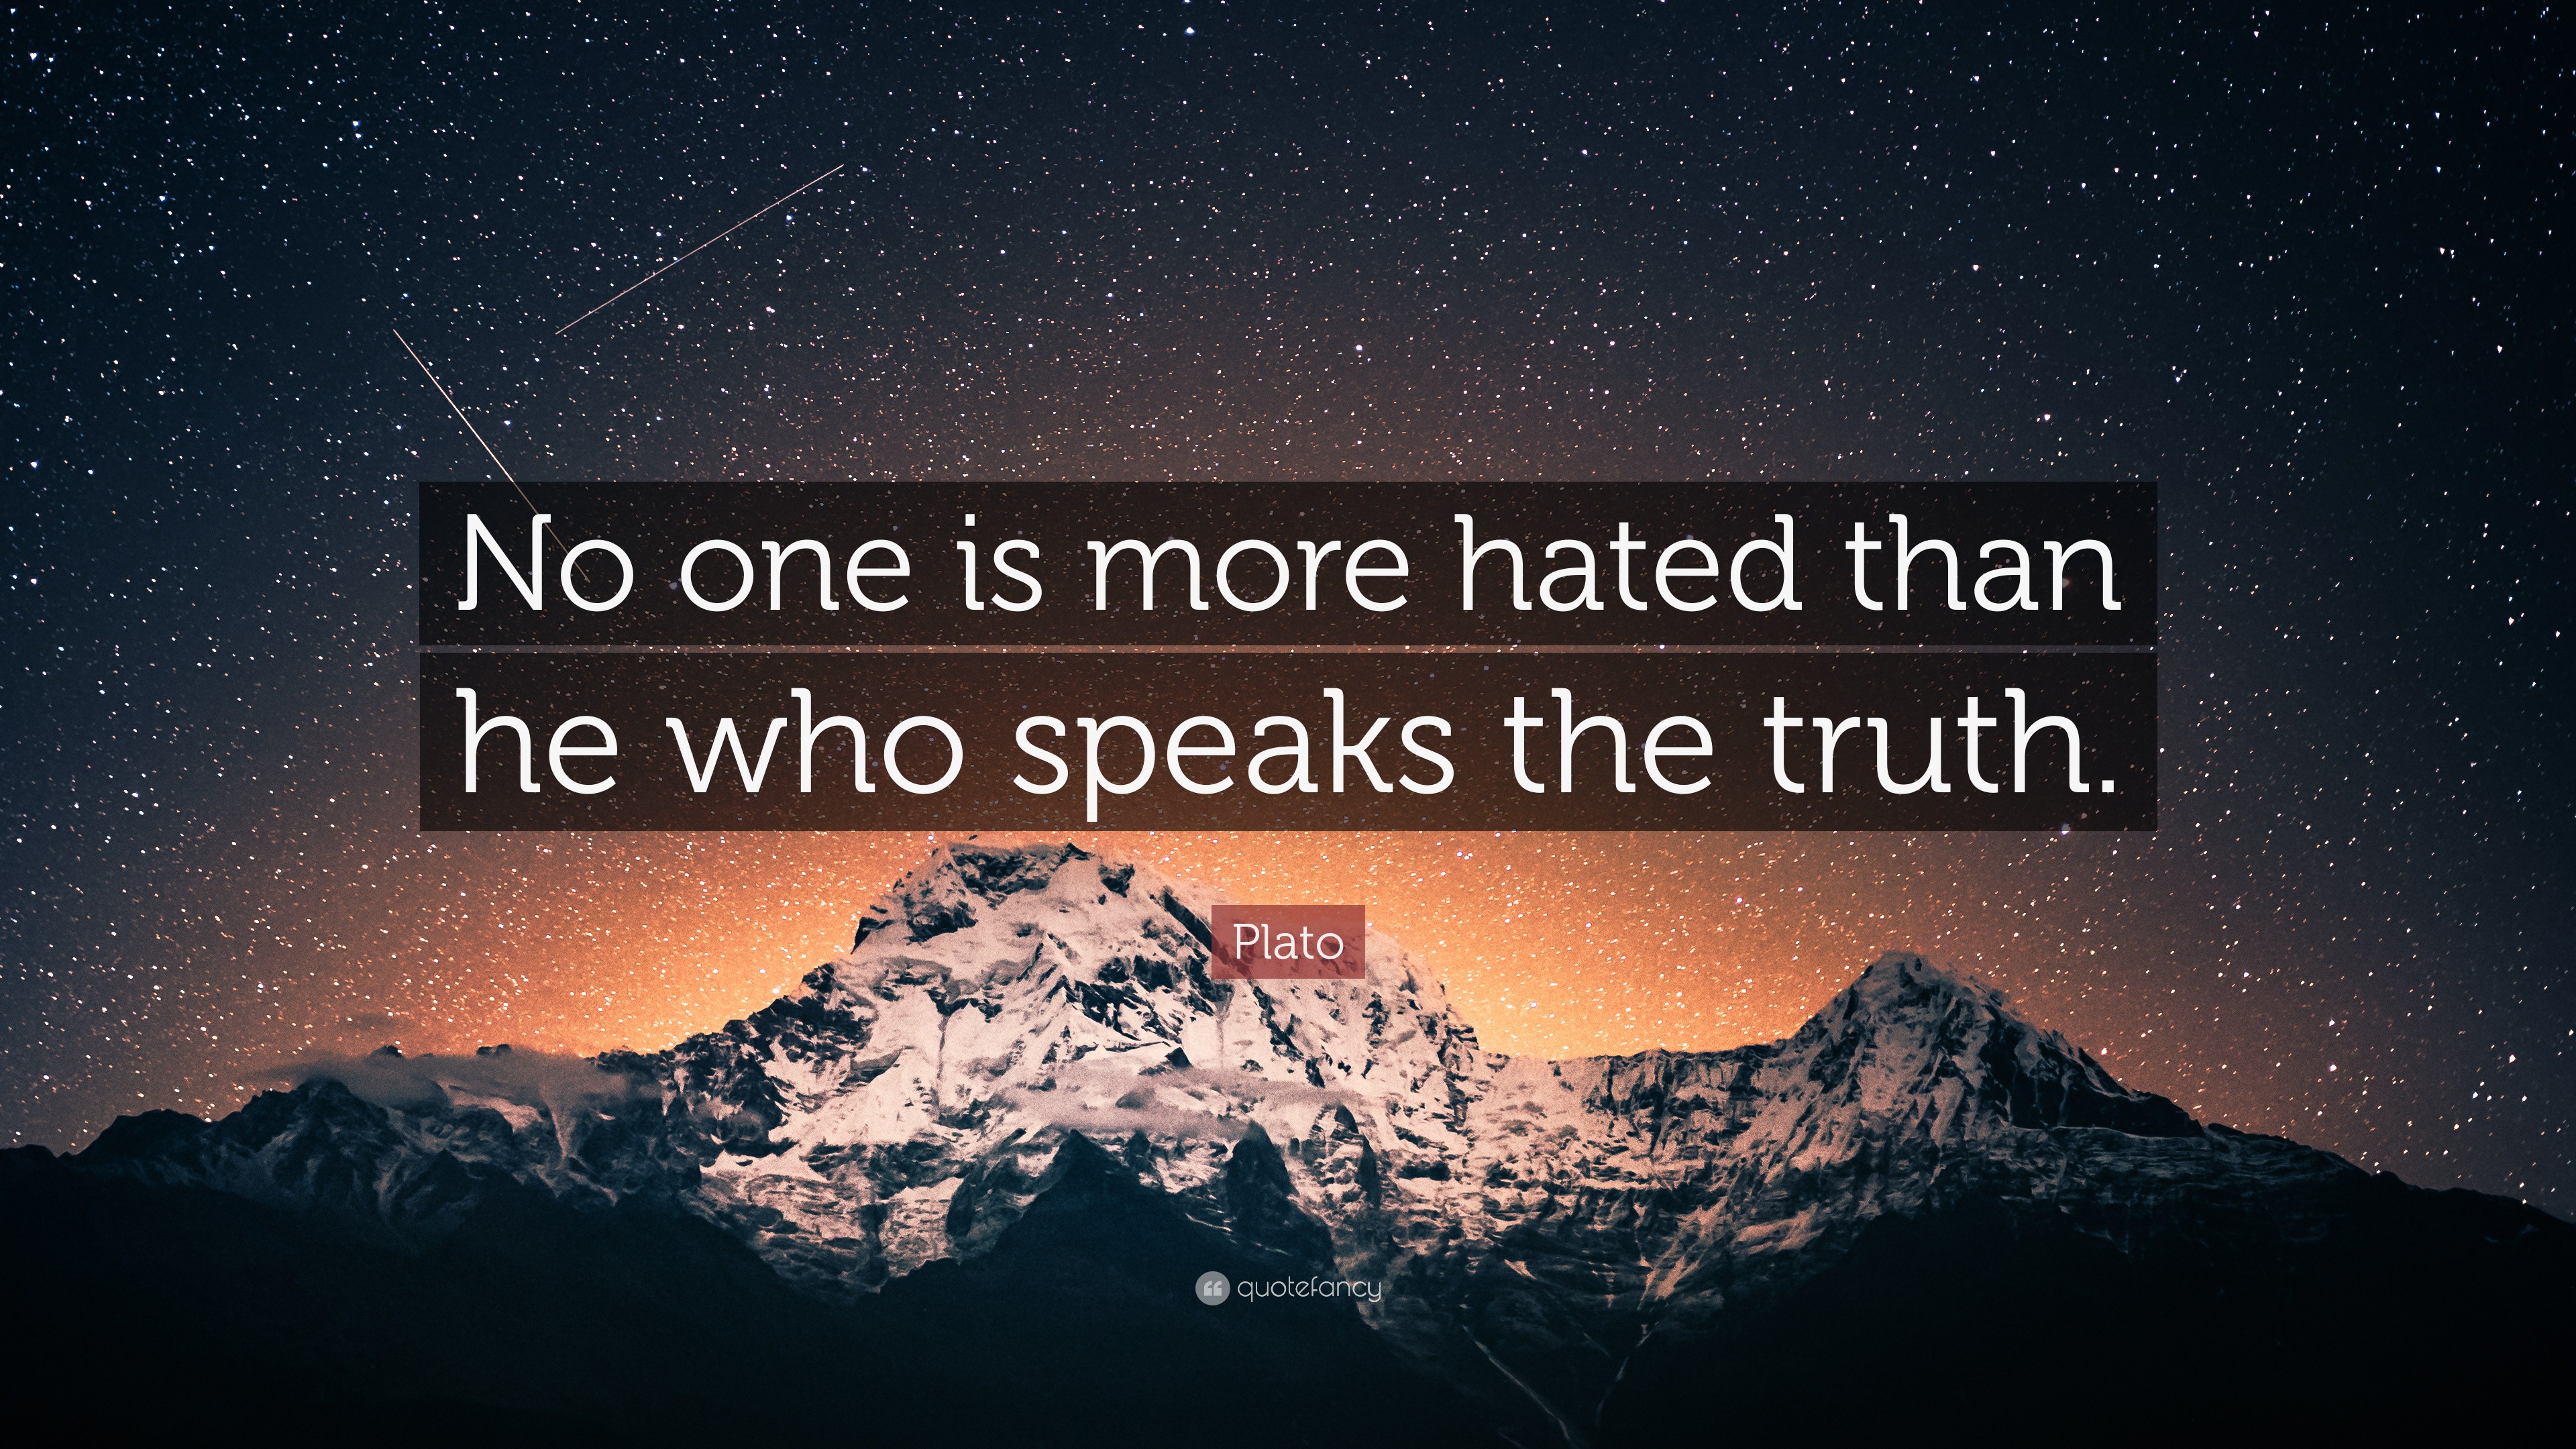 Plato Quote: “No one is more hated than he who speaks the truth.”